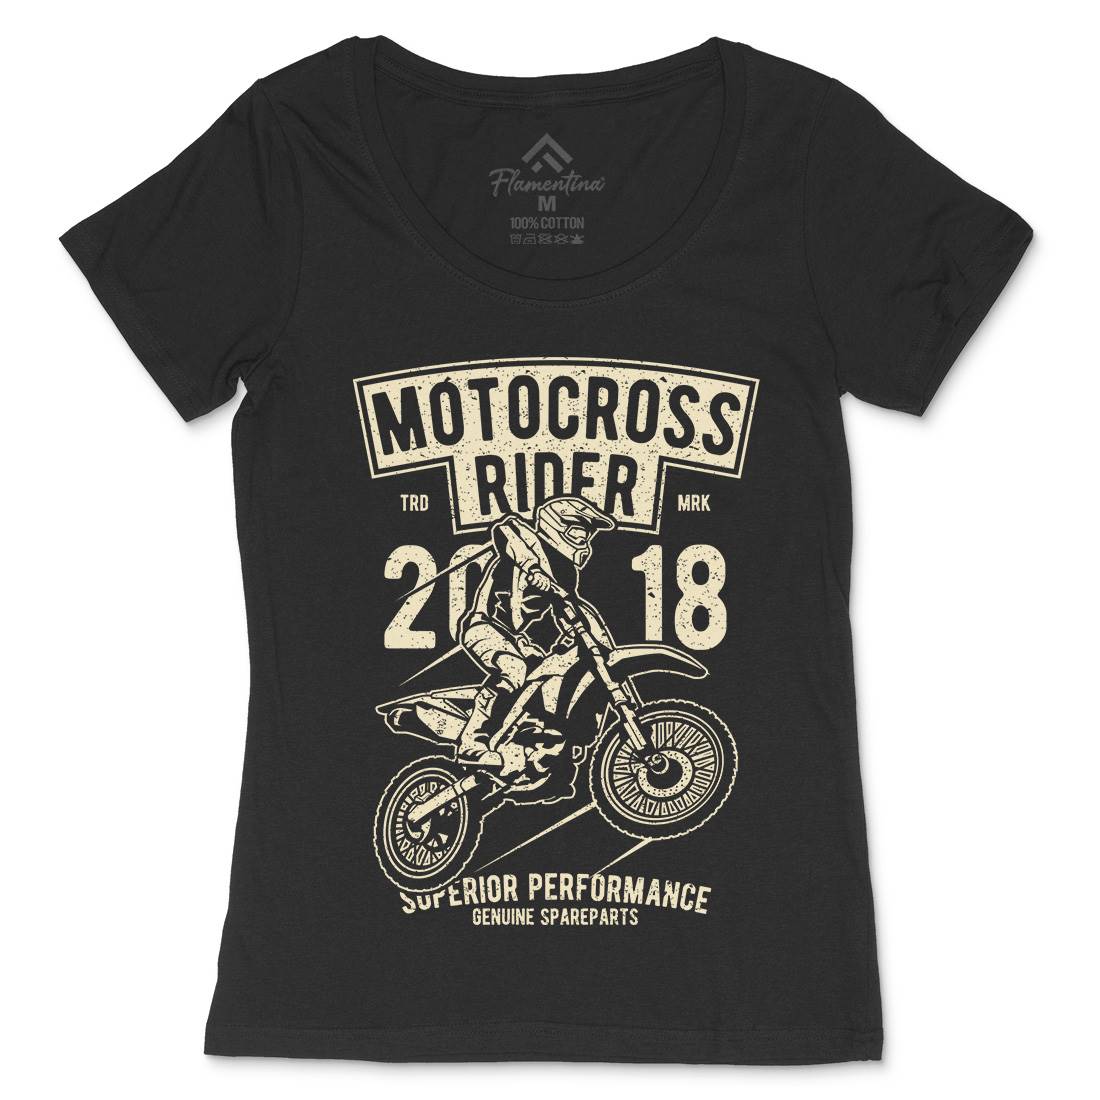 Motocross Rider Womens Scoop Neck T-Shirt Motorcycles A718